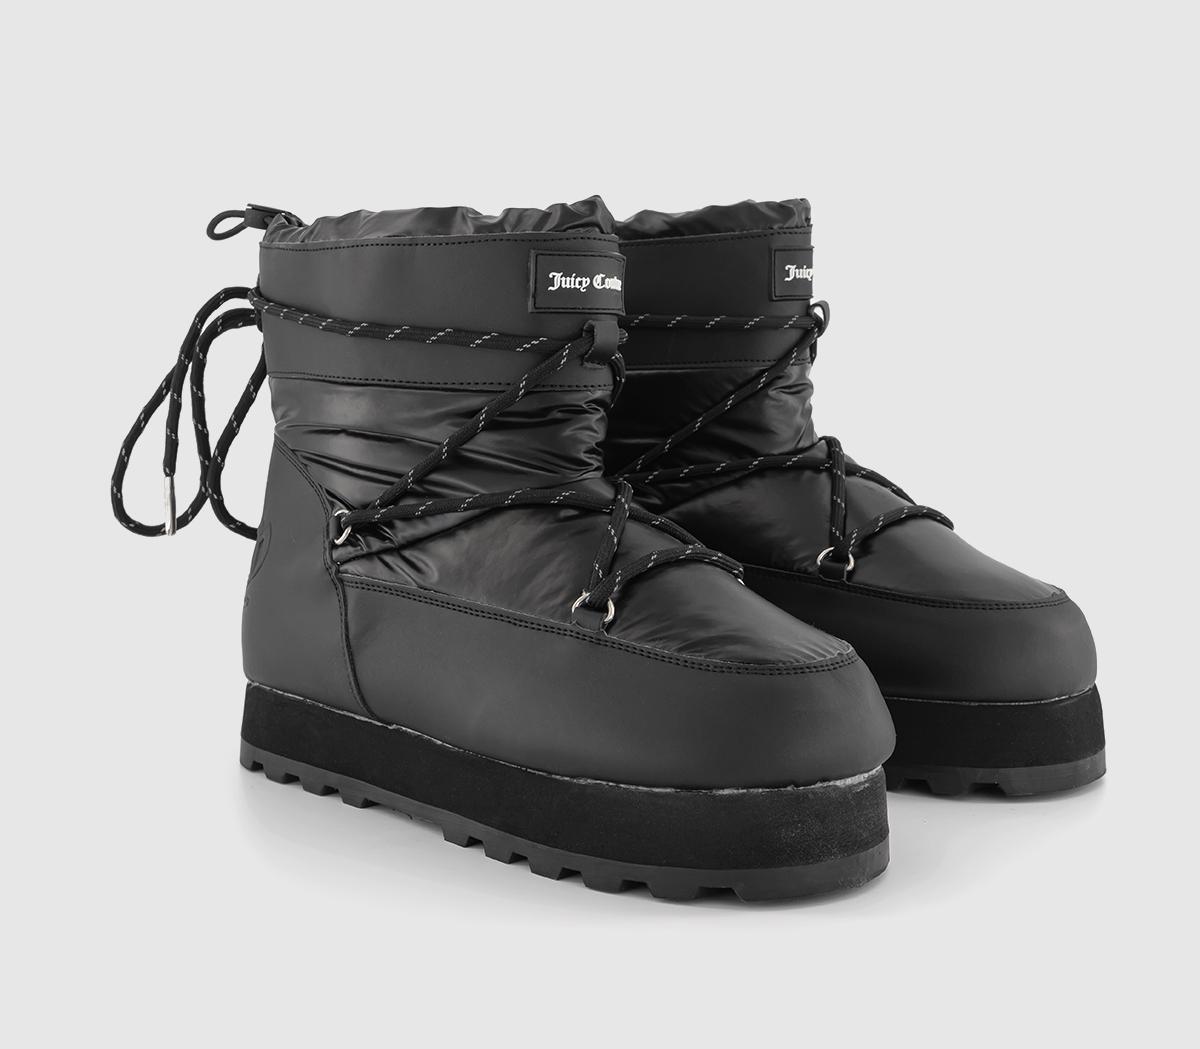 Juicy Couture Womens Mars Boots Black, 3